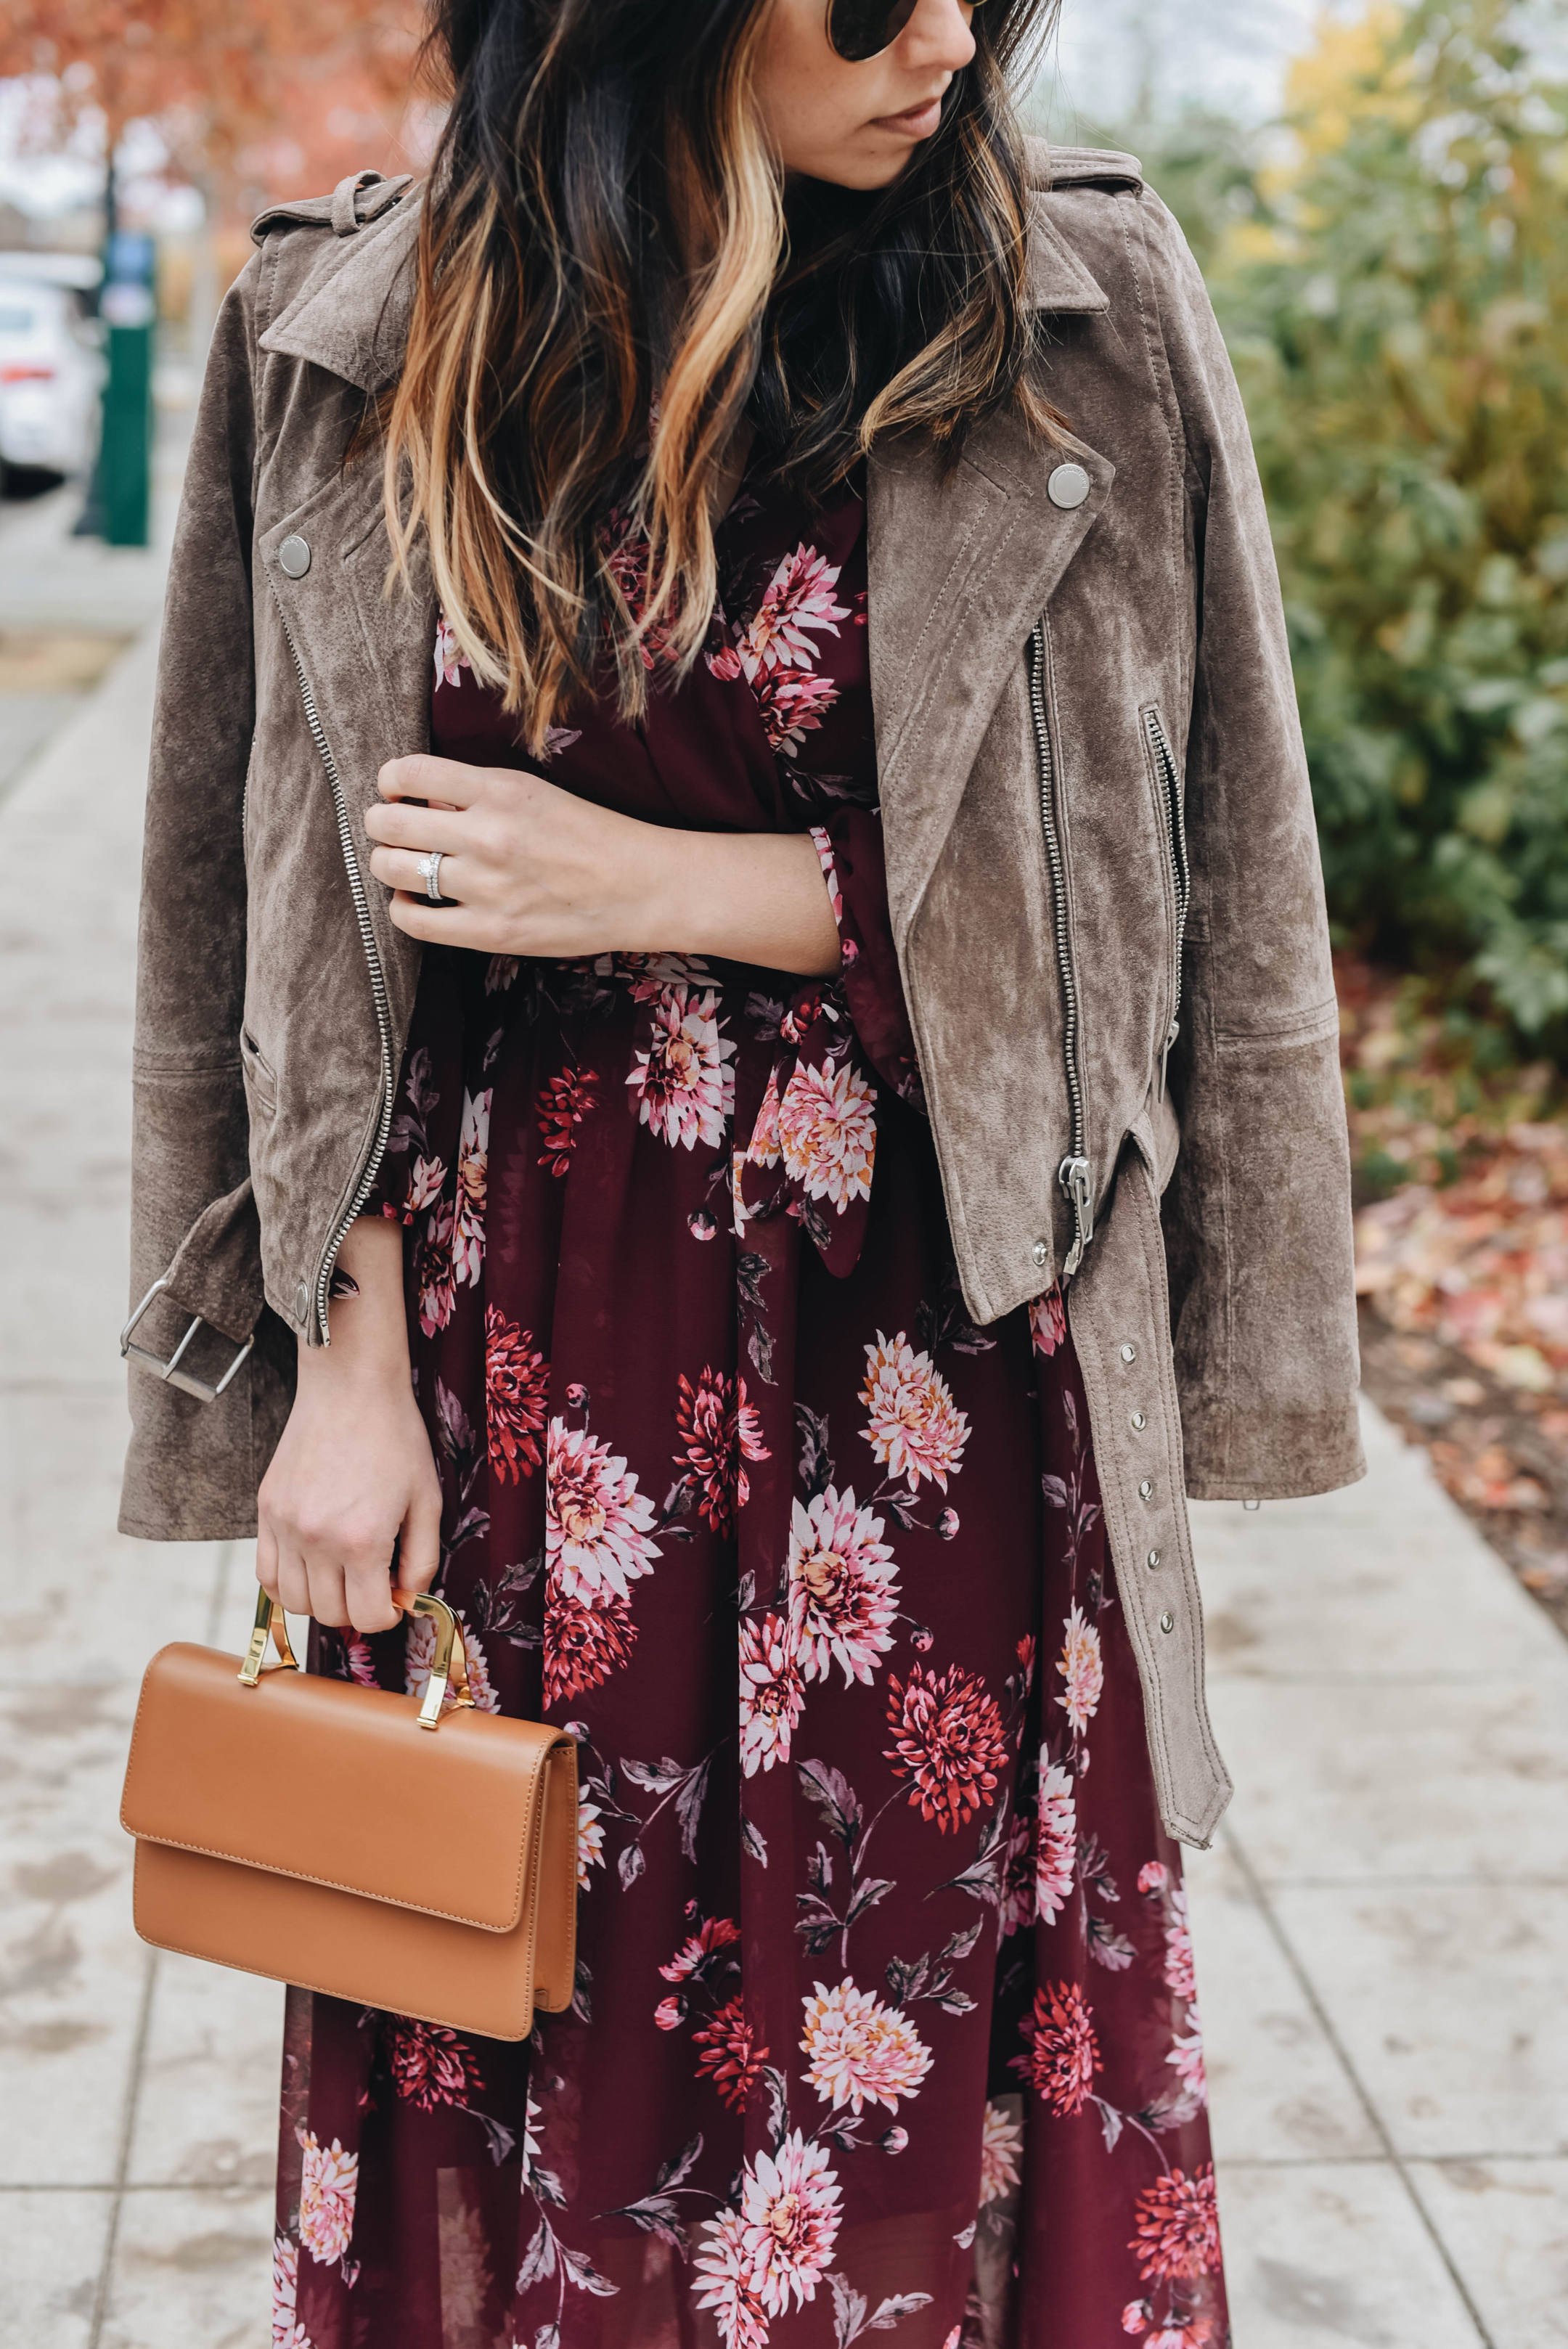 Best dresses for a fall wedding